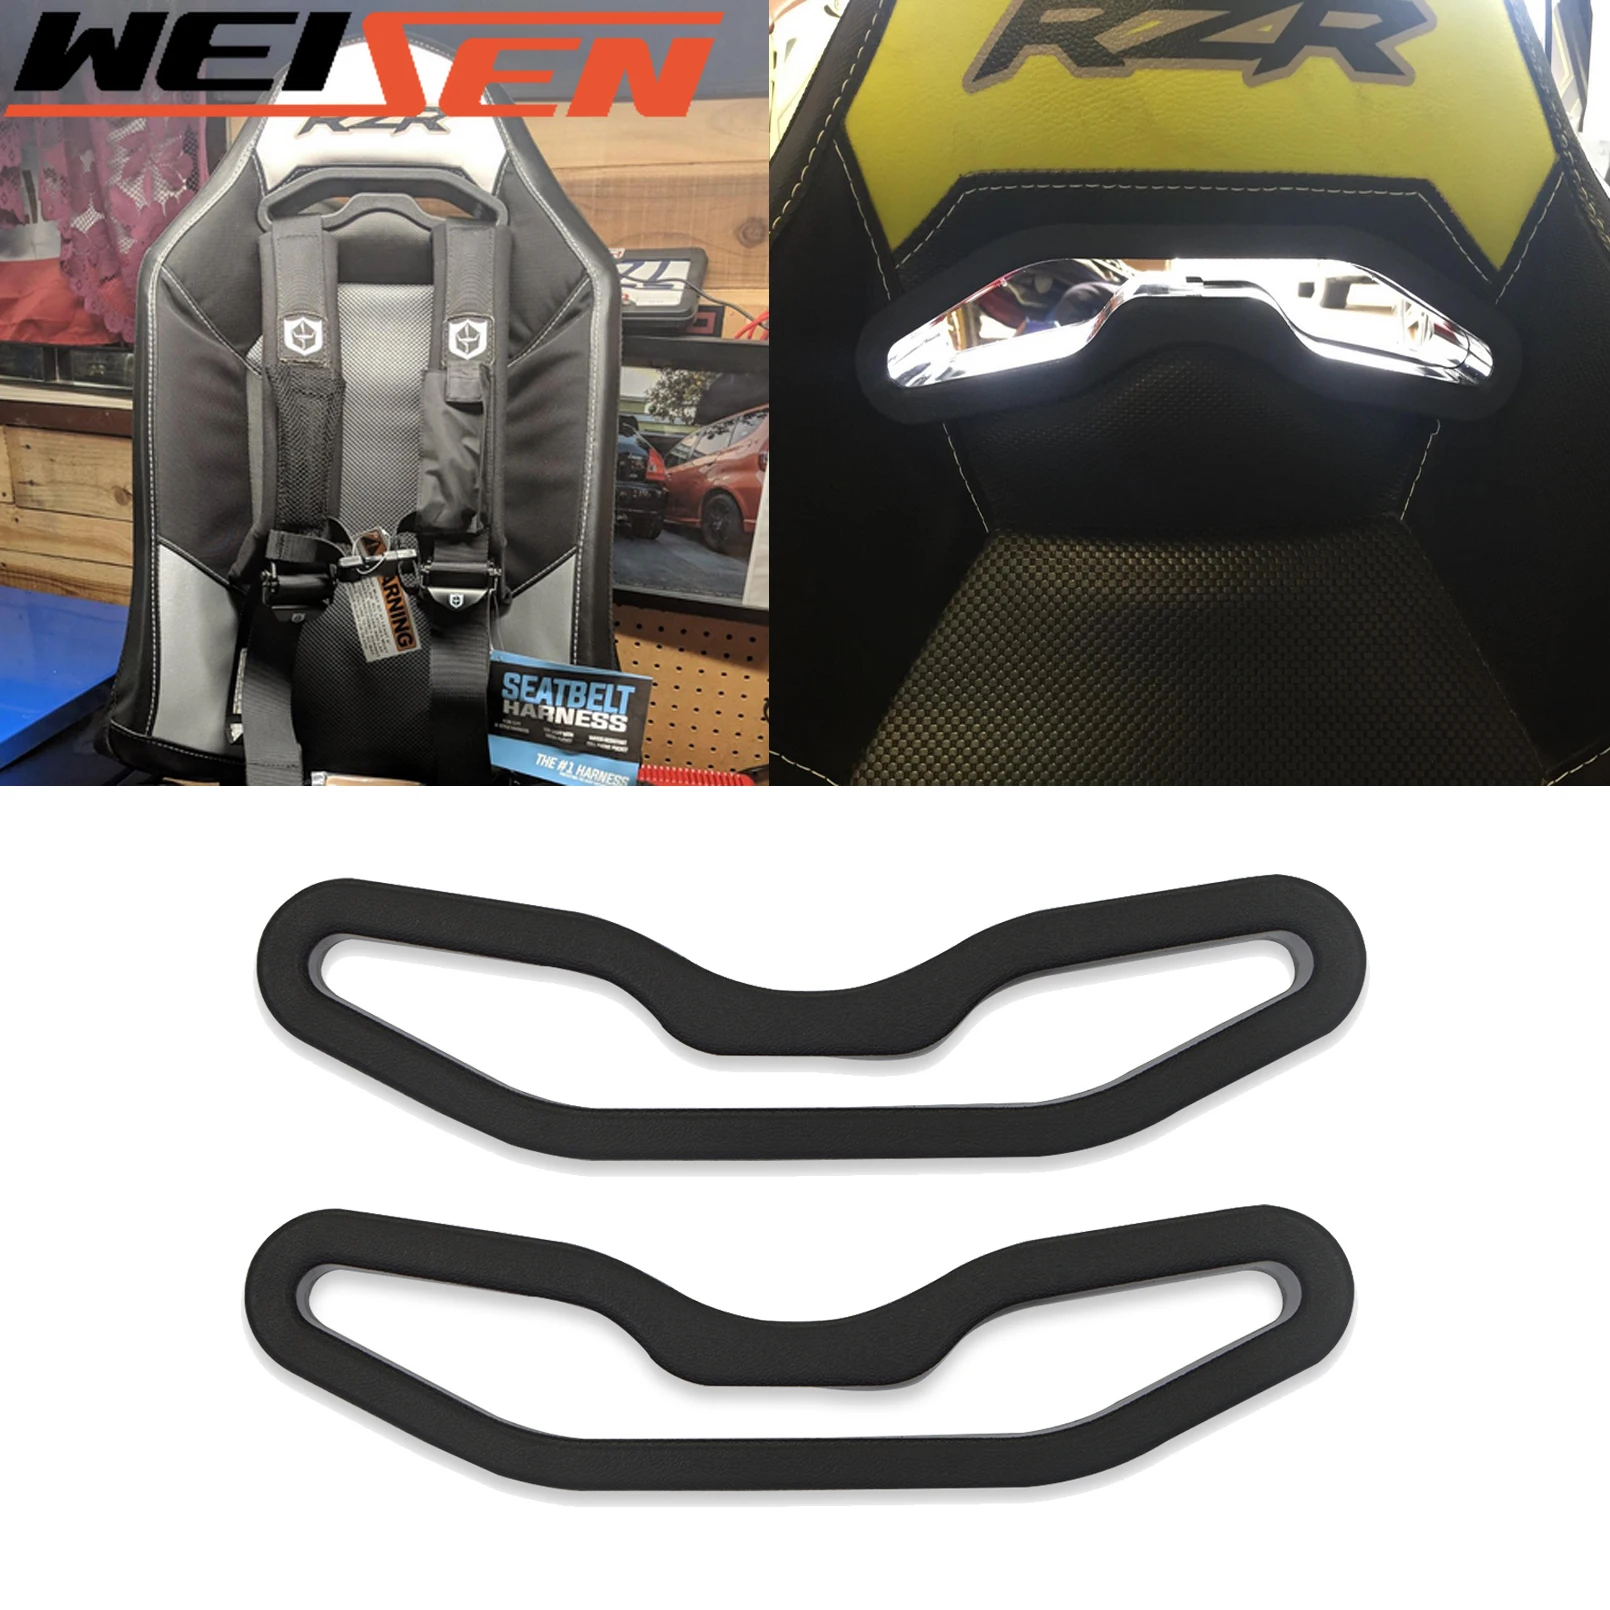 UTV Accessories Harness Pass Through Seat Bezel Insert Fit Black For Polaris RZR XP XP4 1000 900 General With New Style Seats